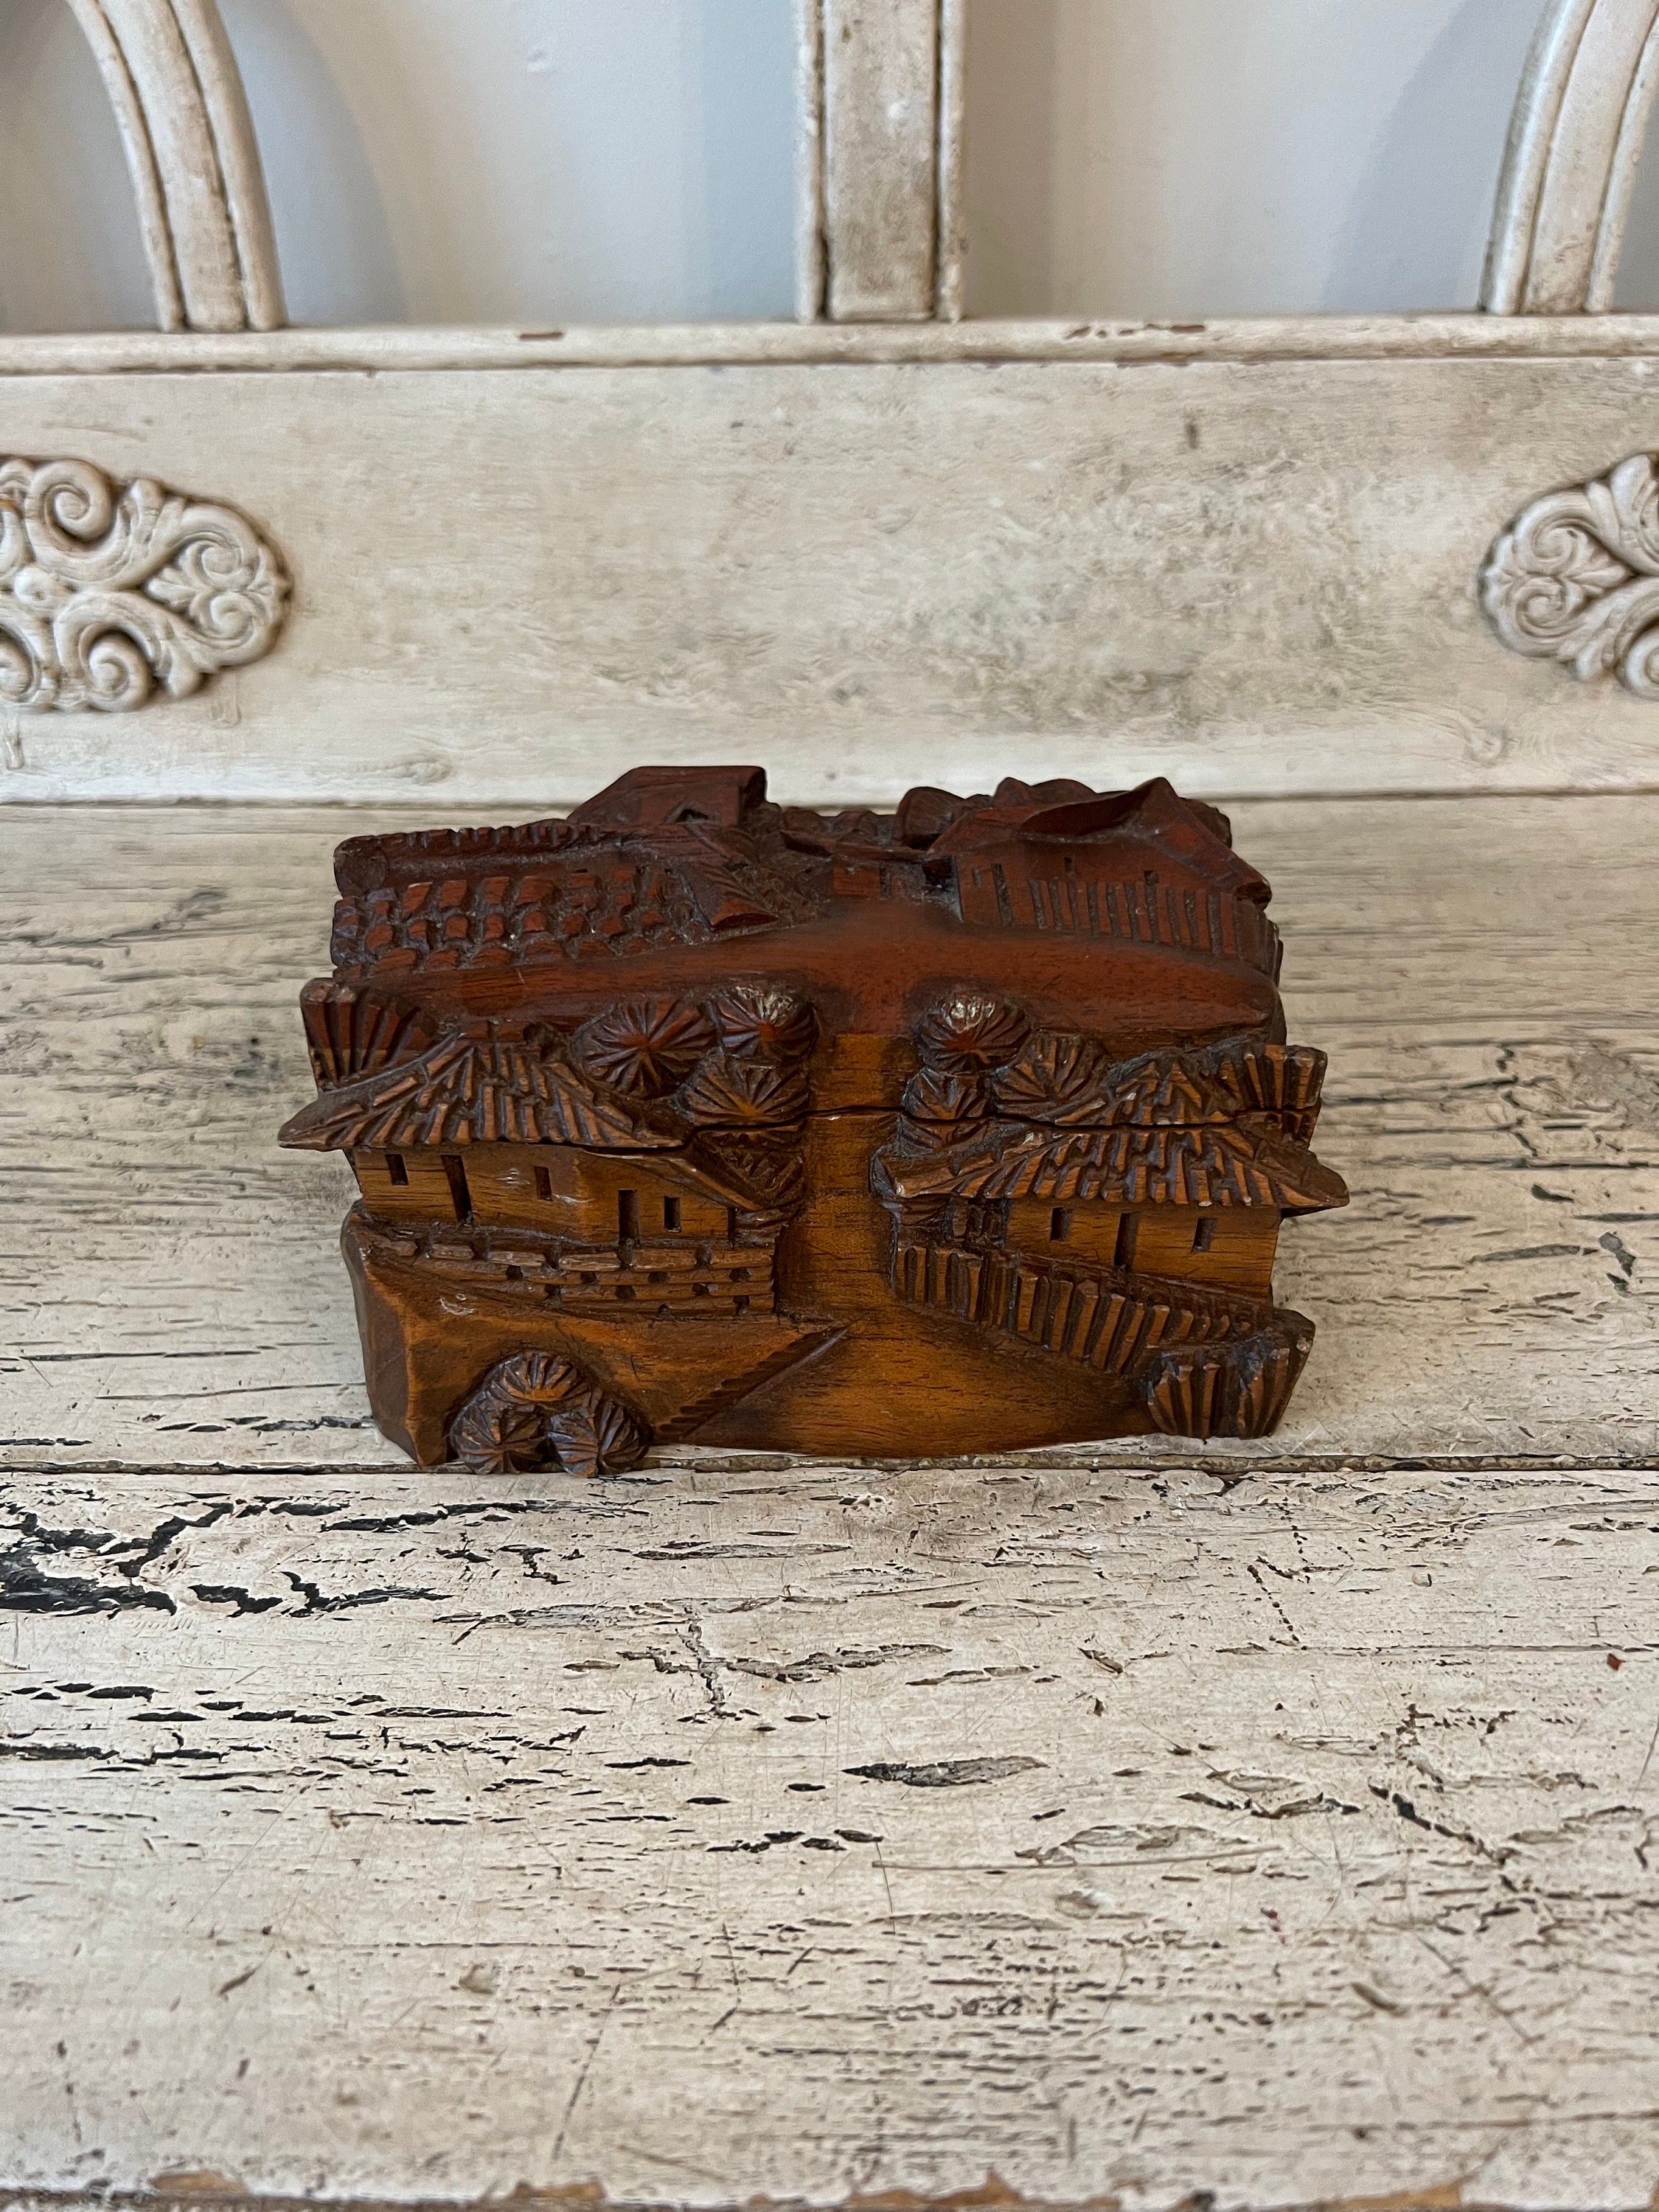 Vintage Jewelry Box - Classic Victorian Style Trinket Box with Lock -  Cylindrical Wooden Box for Accessories - Small Keepsake Box w/ Top Handle 